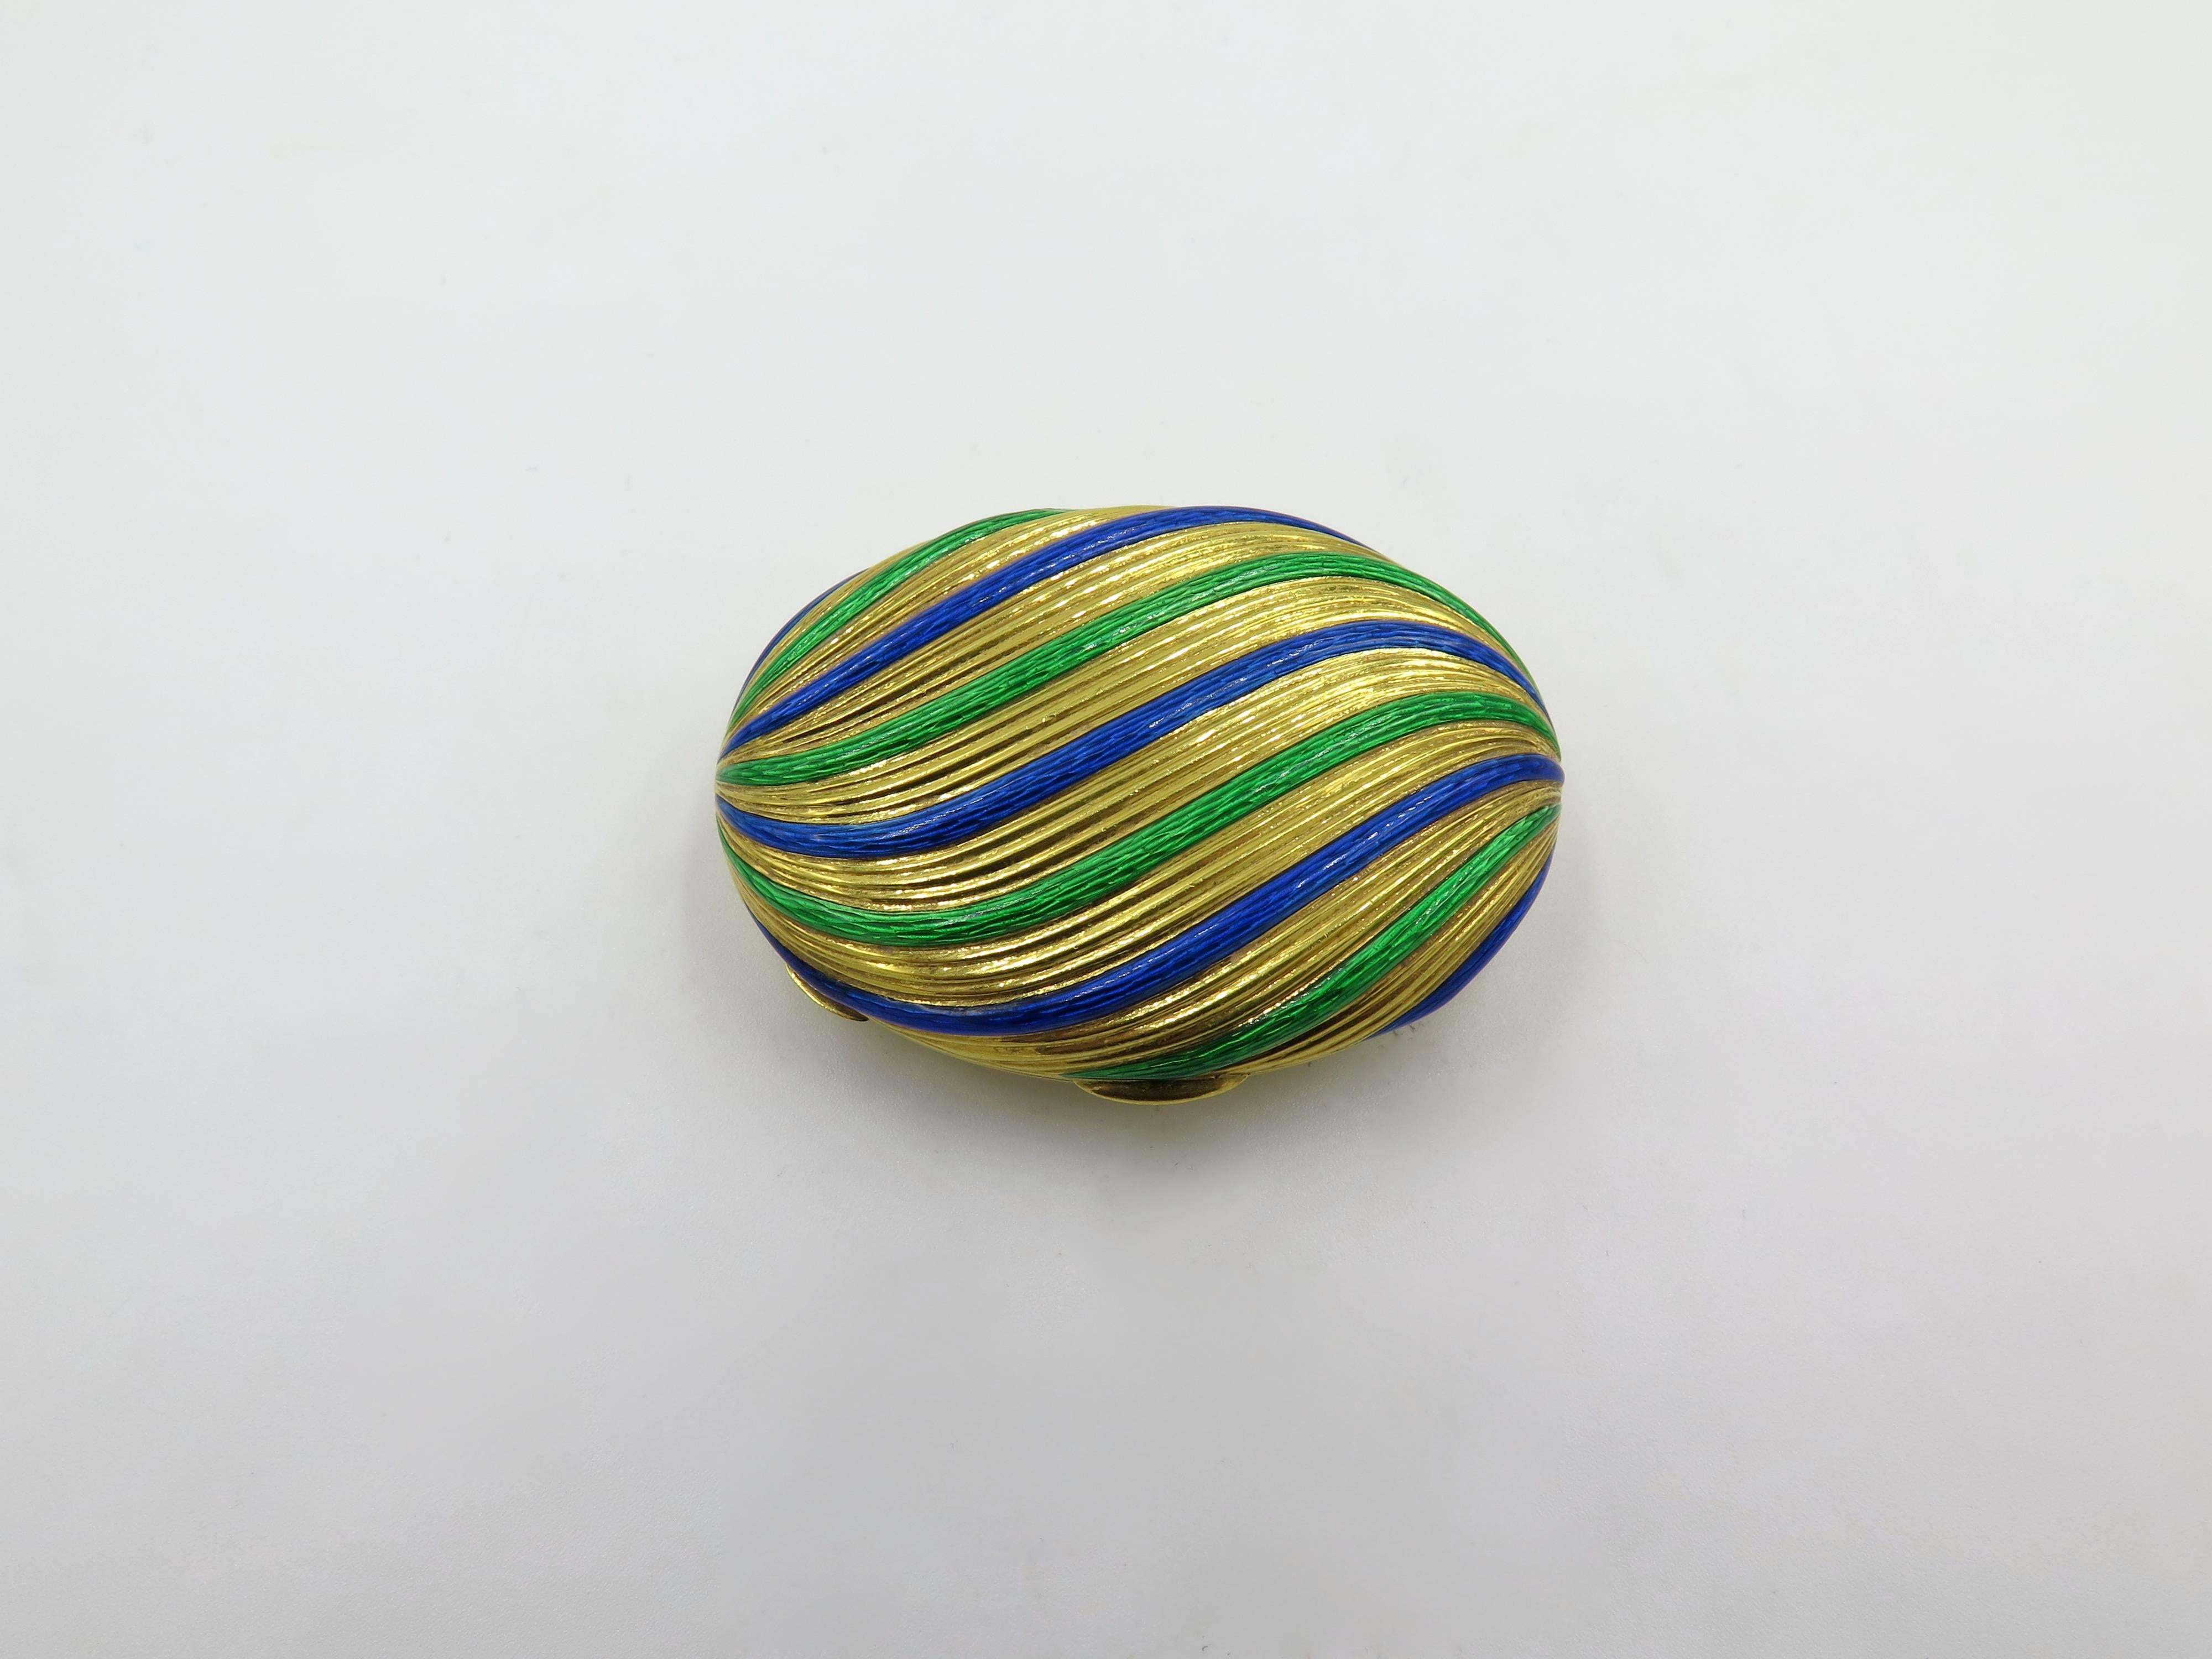 An 18 karat yellow gold and enamel pill box. Of oval outline, the top decorated by a fluted pattern, enhanced by blue and green enamel. The box measures approximately 2 x 1 1/2 inches, gross weight is approximately 37.9 grams. 